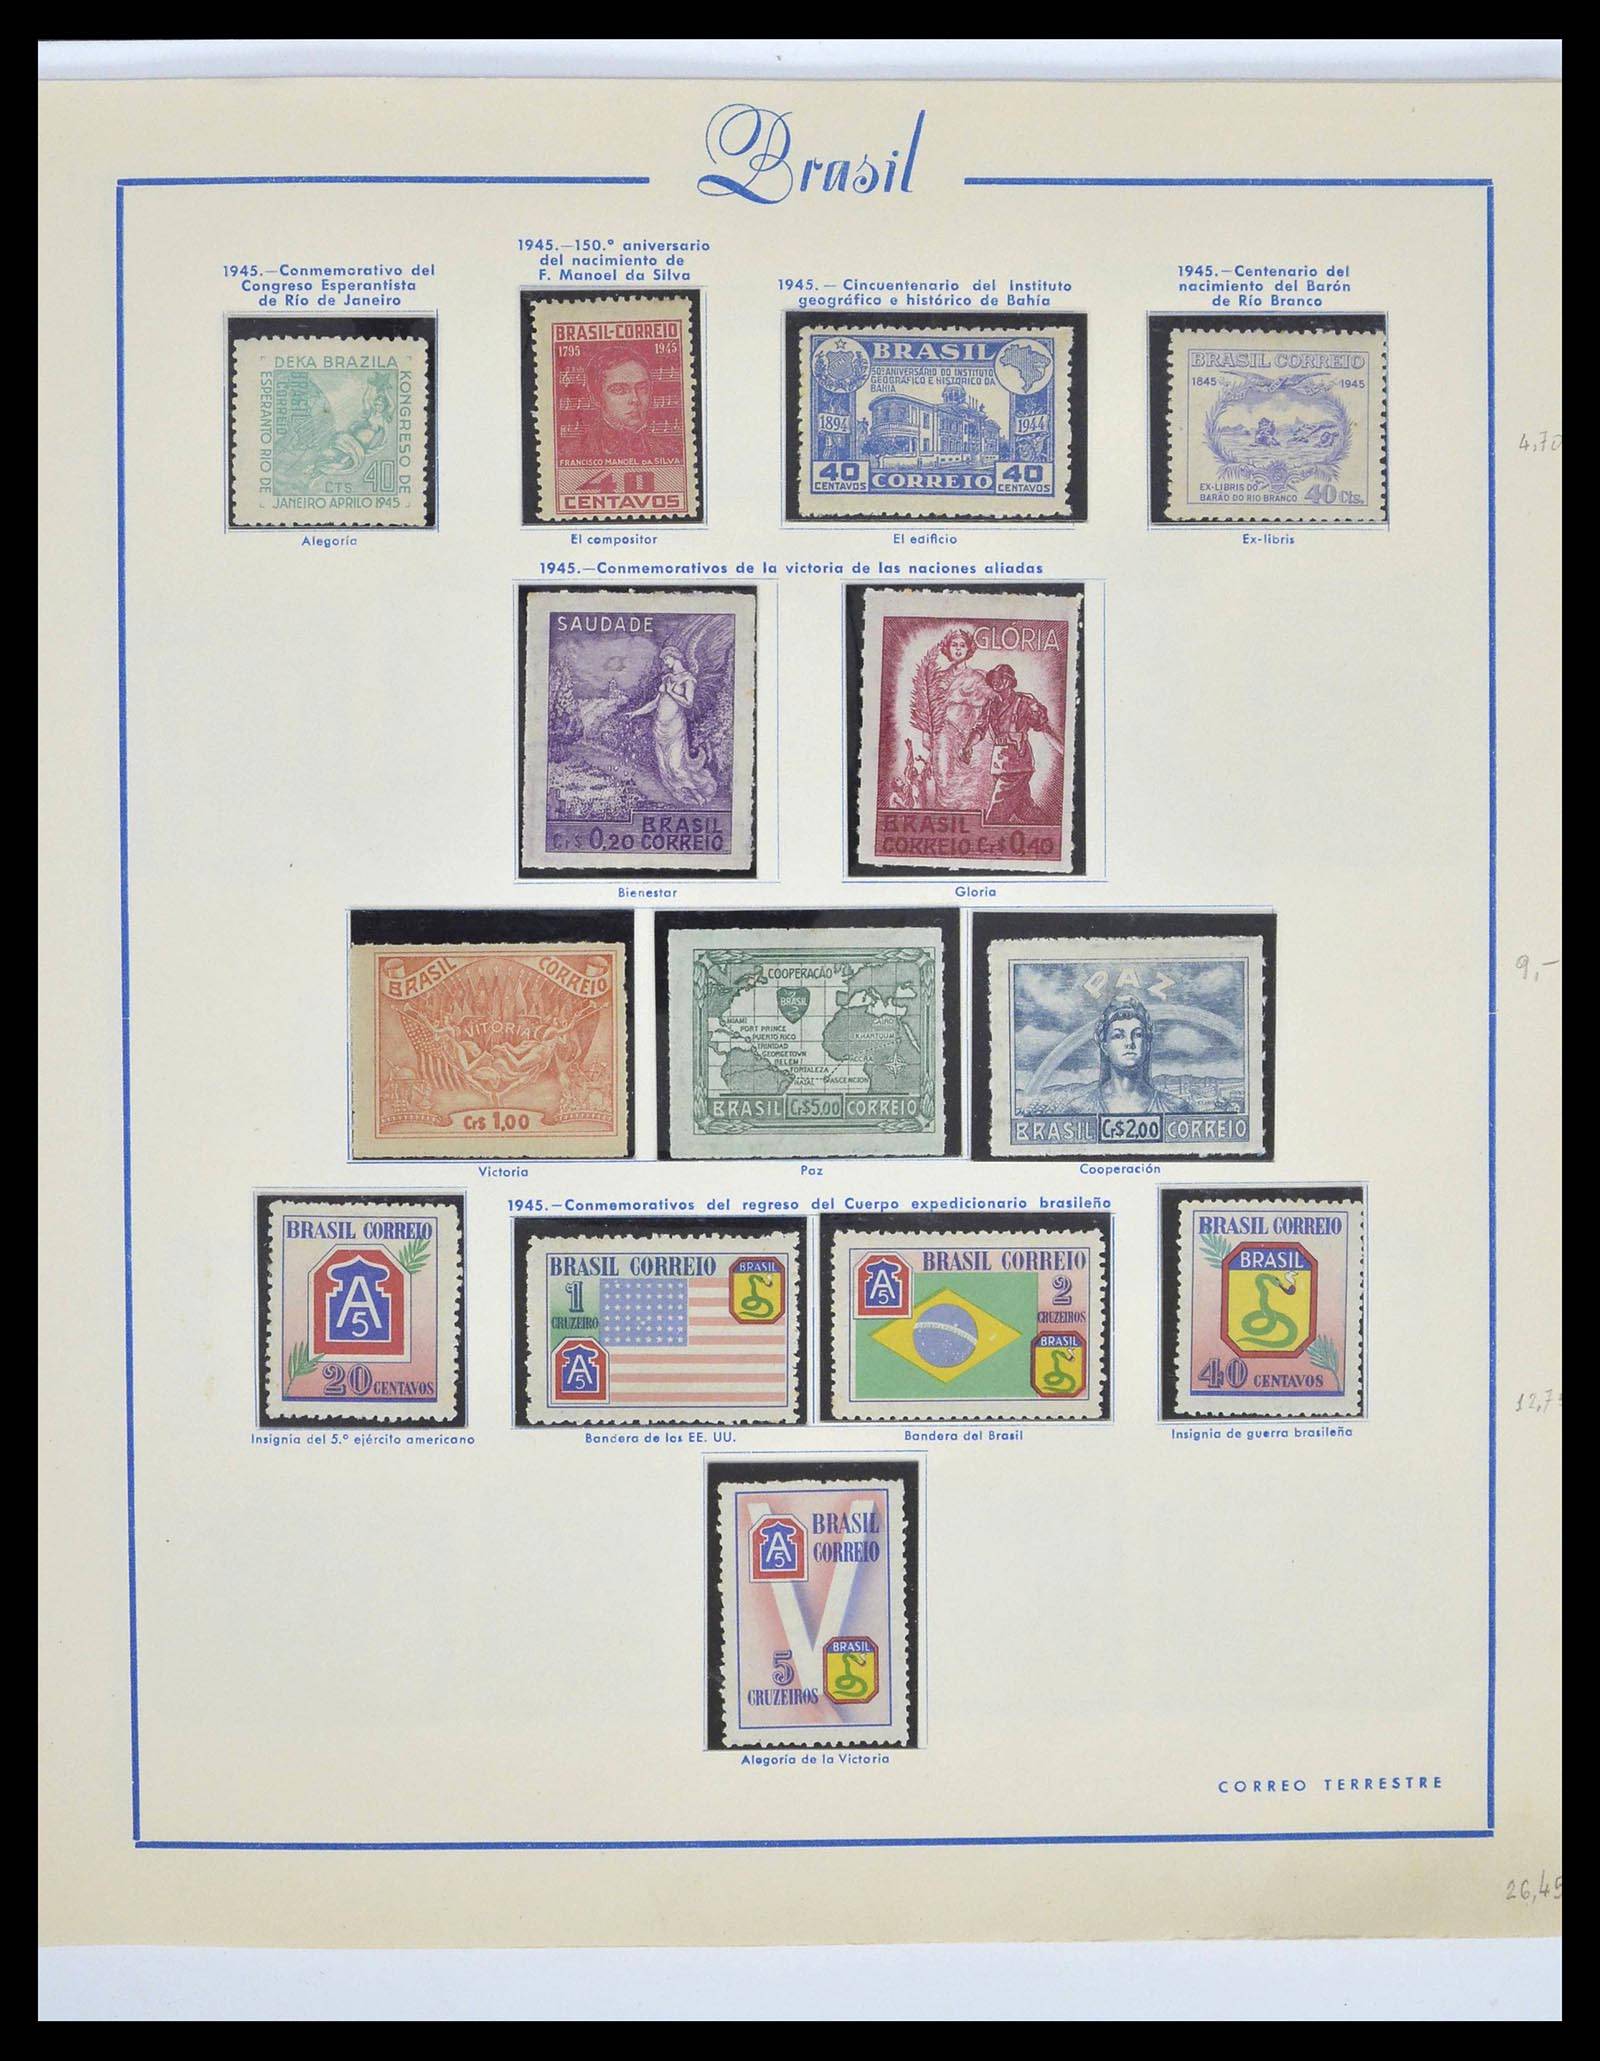 39245 0025 - Stamp collection 39245 Brazil 1843-1968.